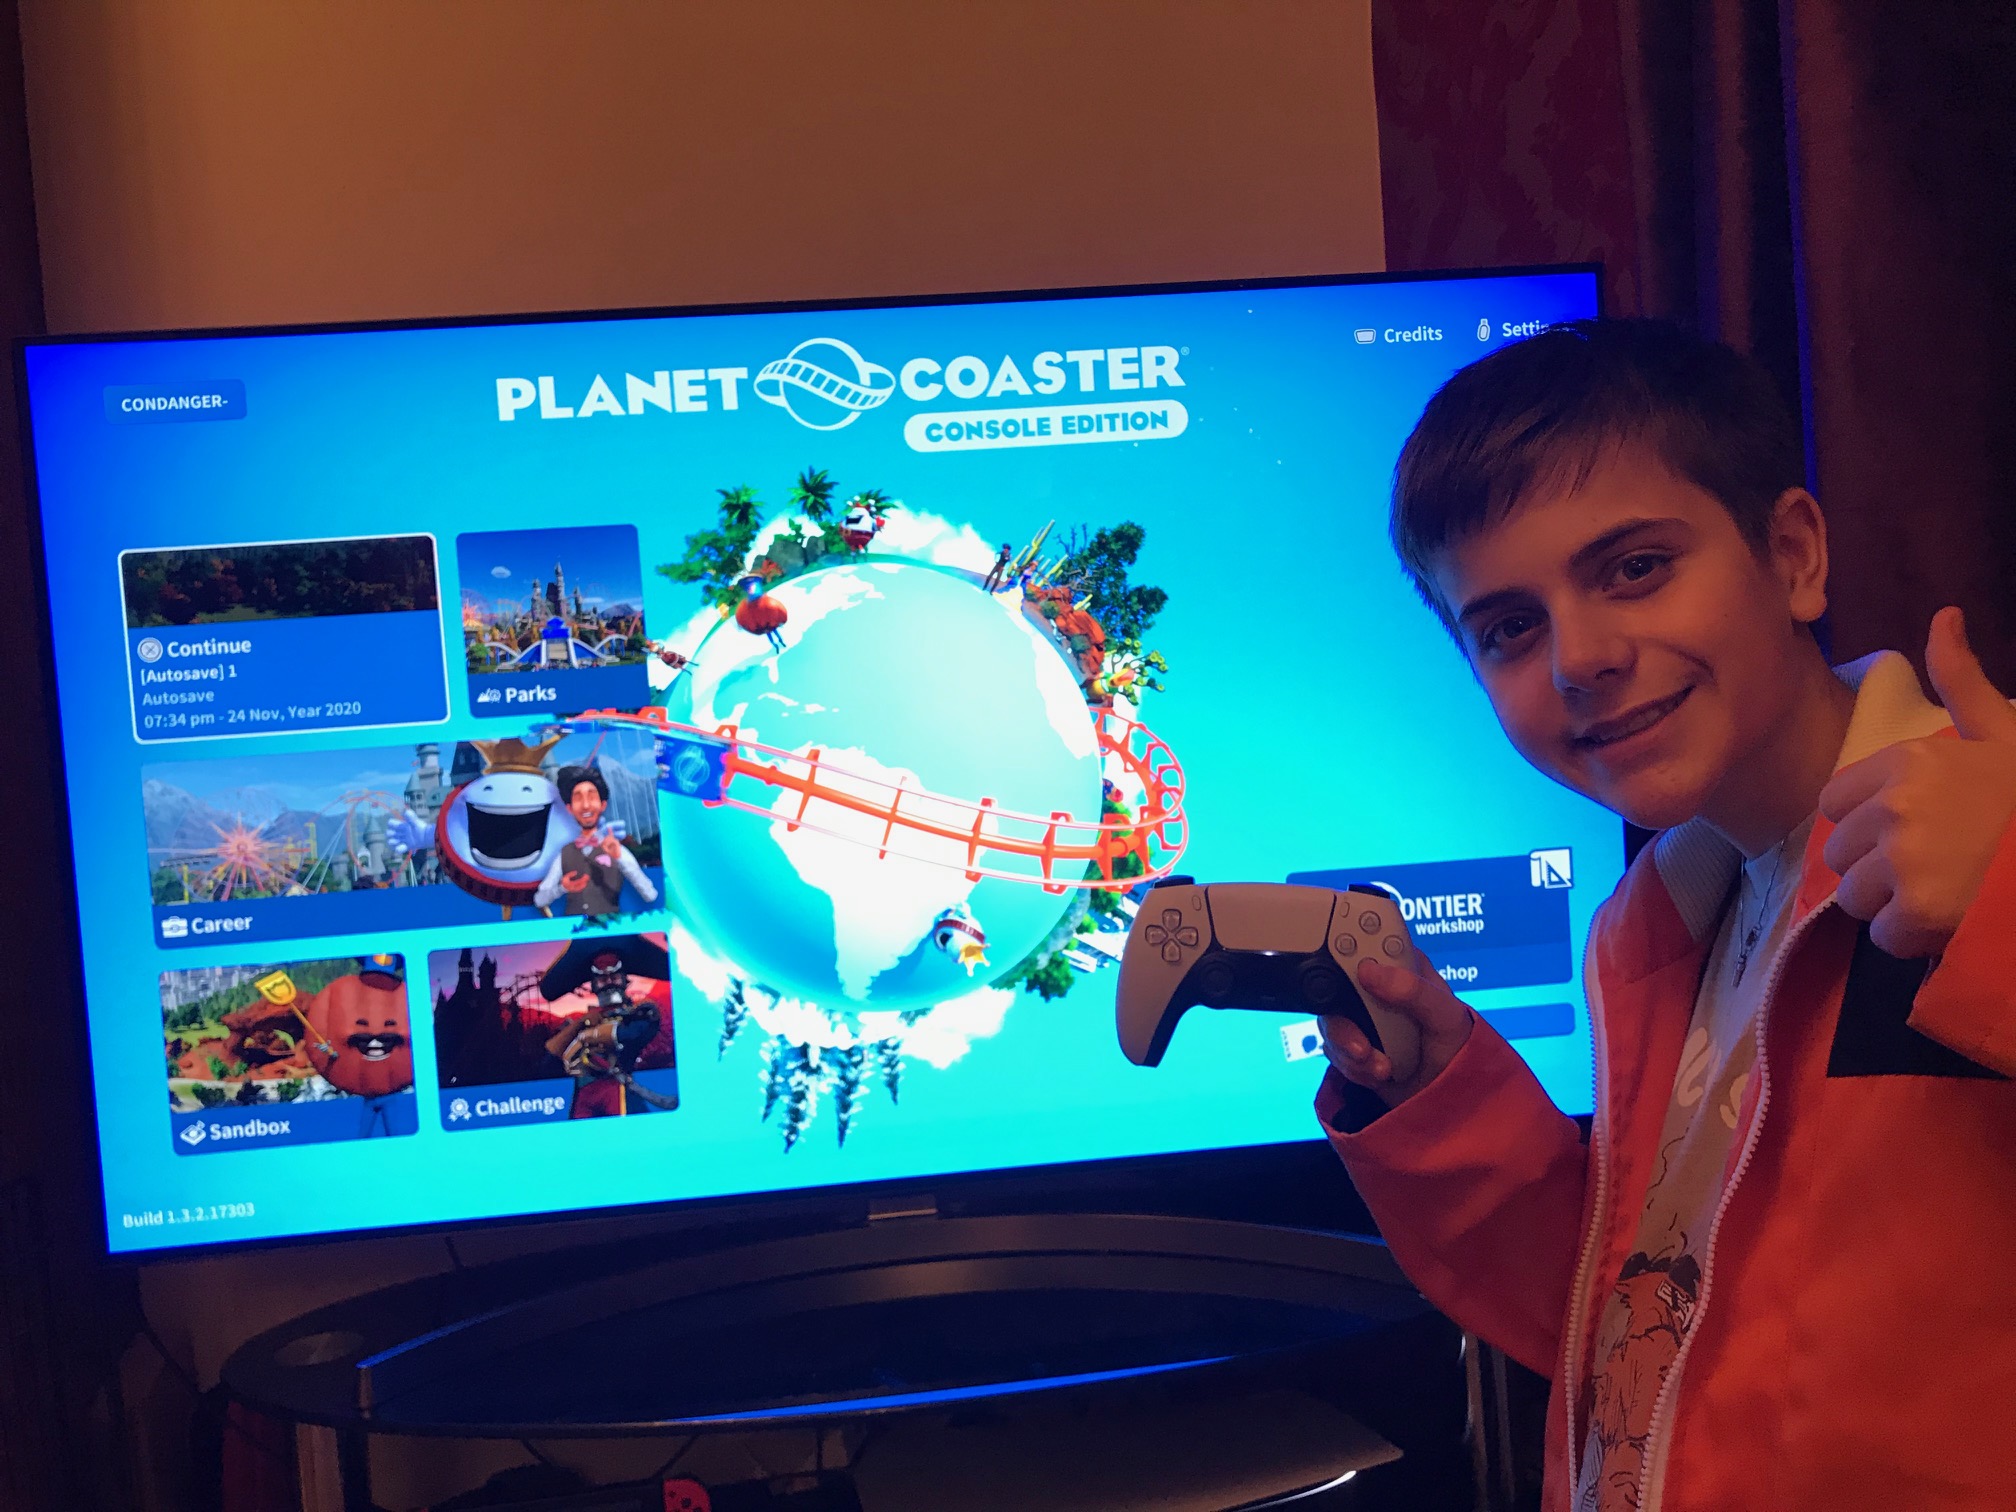 planet coaster ps5 download free